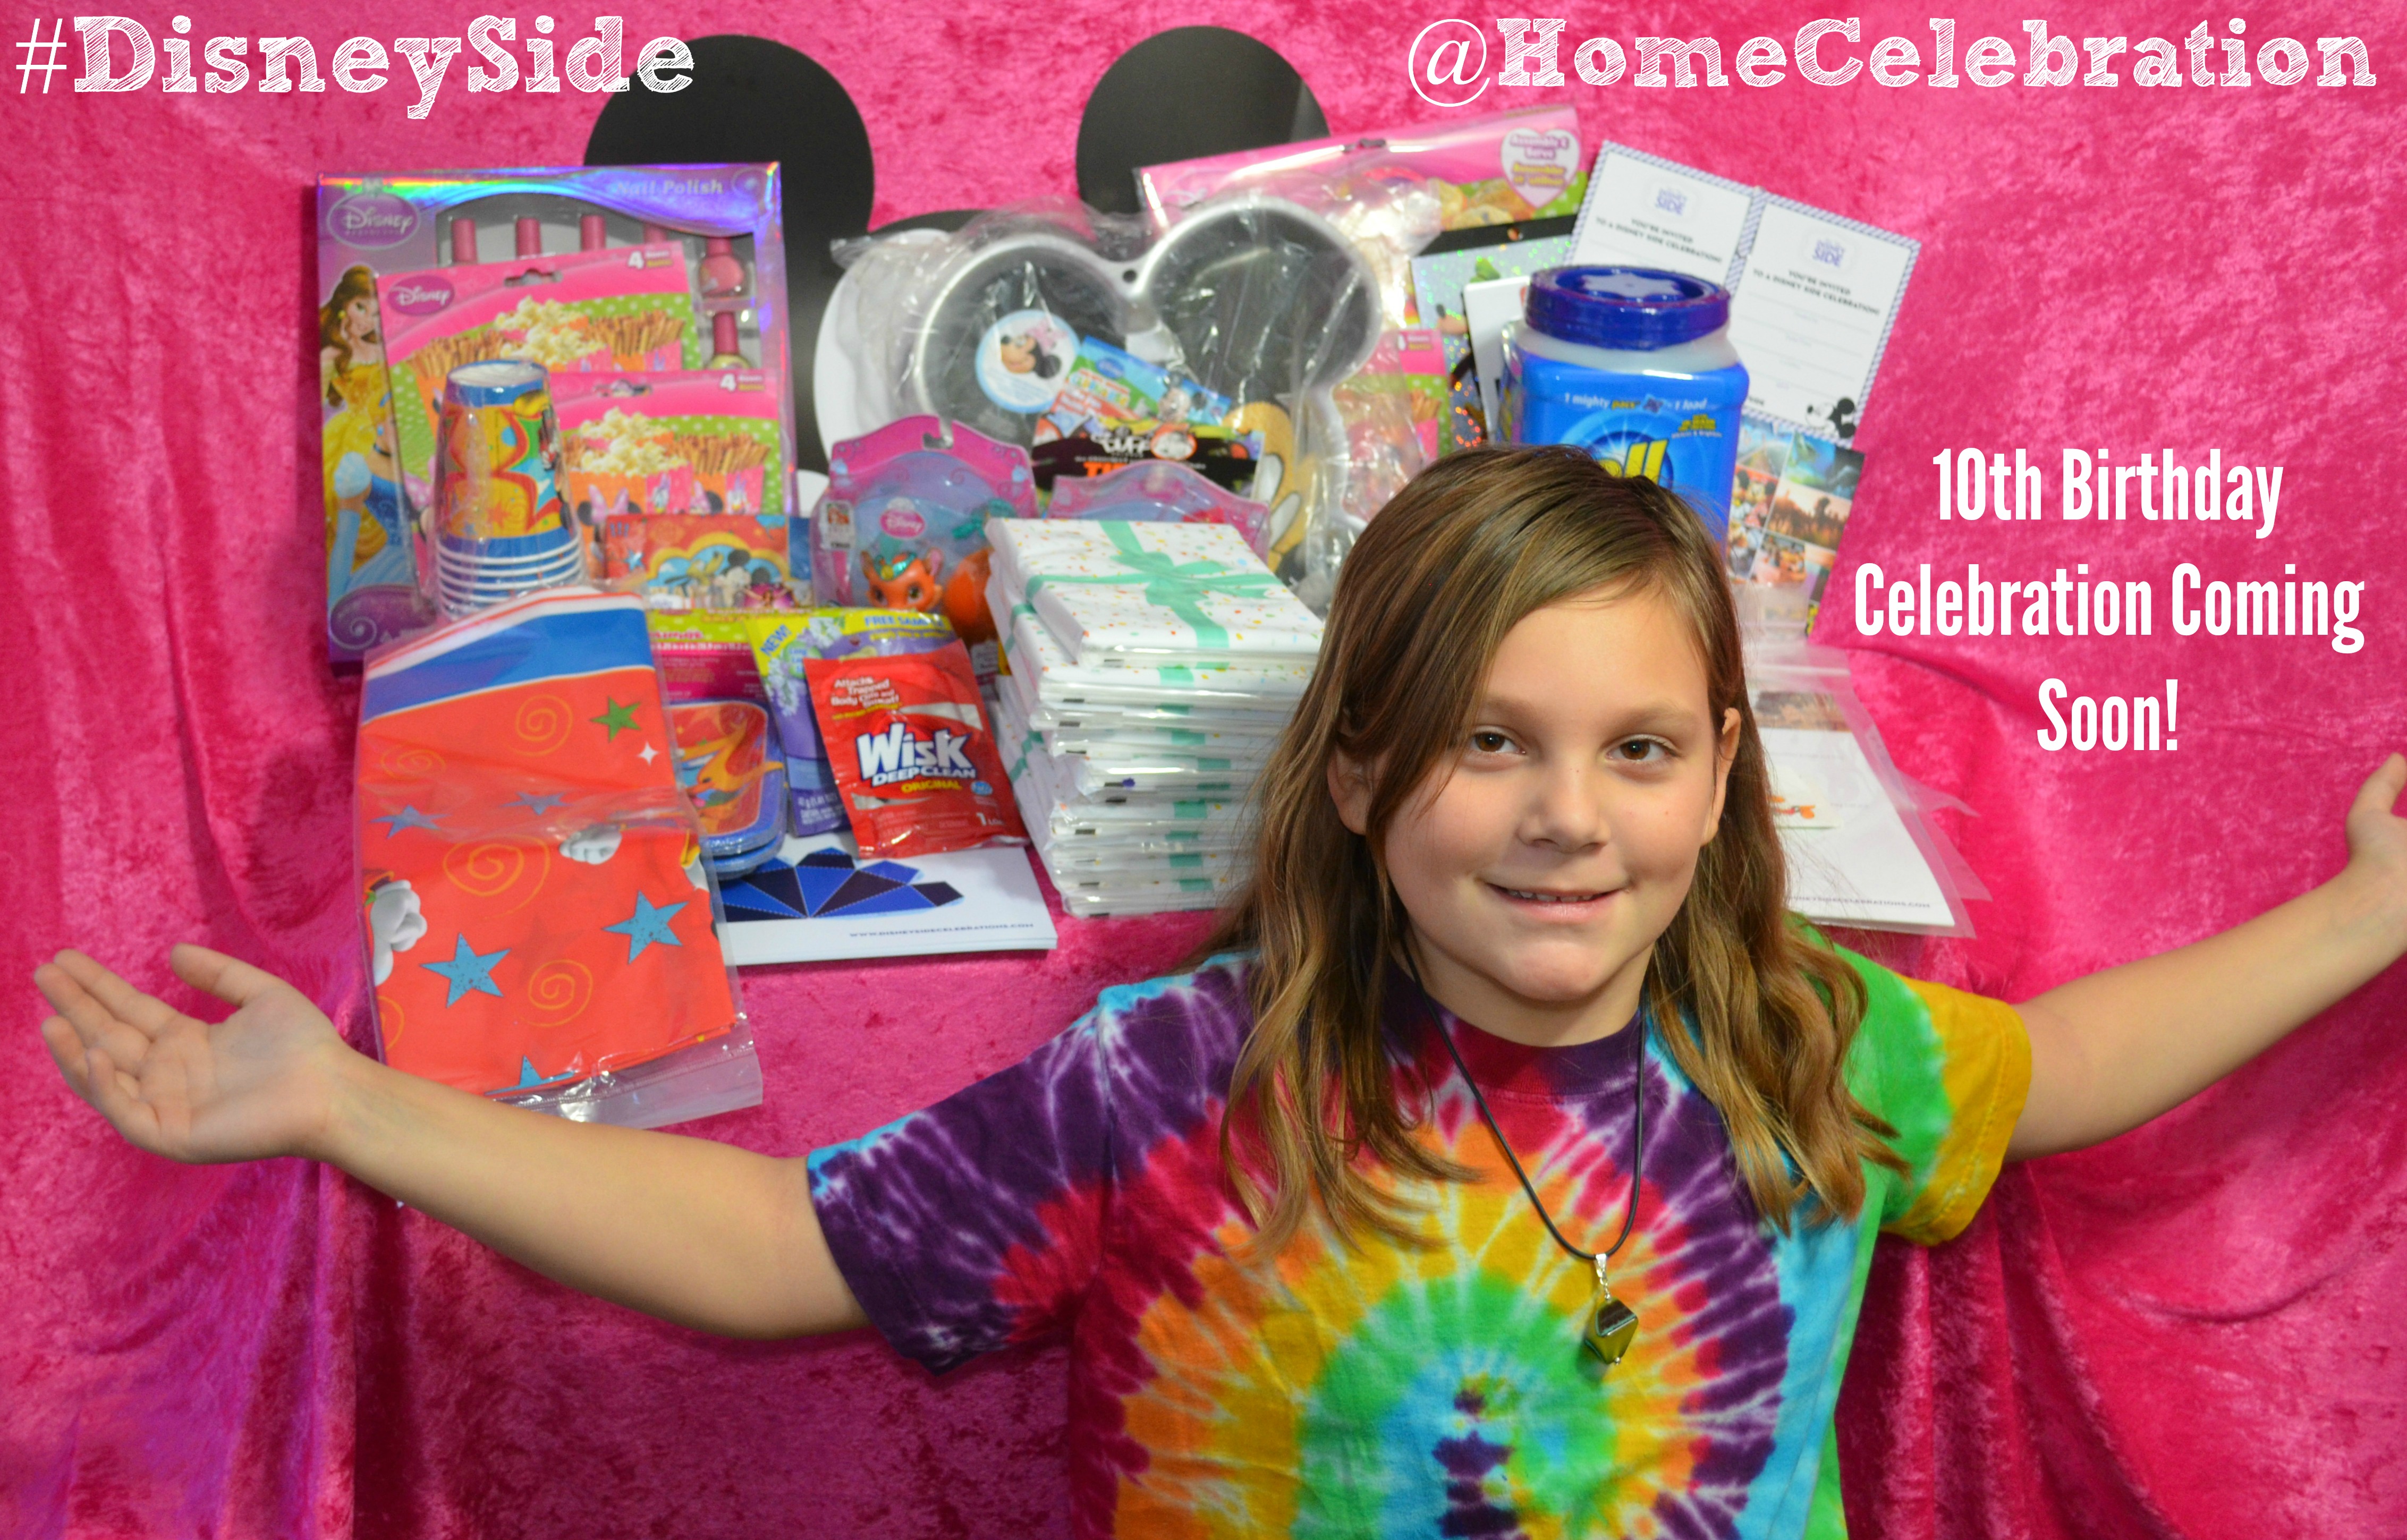 Coming Soon - Our #DisneySide @HomeCelebration - Birthday Party for My Girl...4530 x 2899